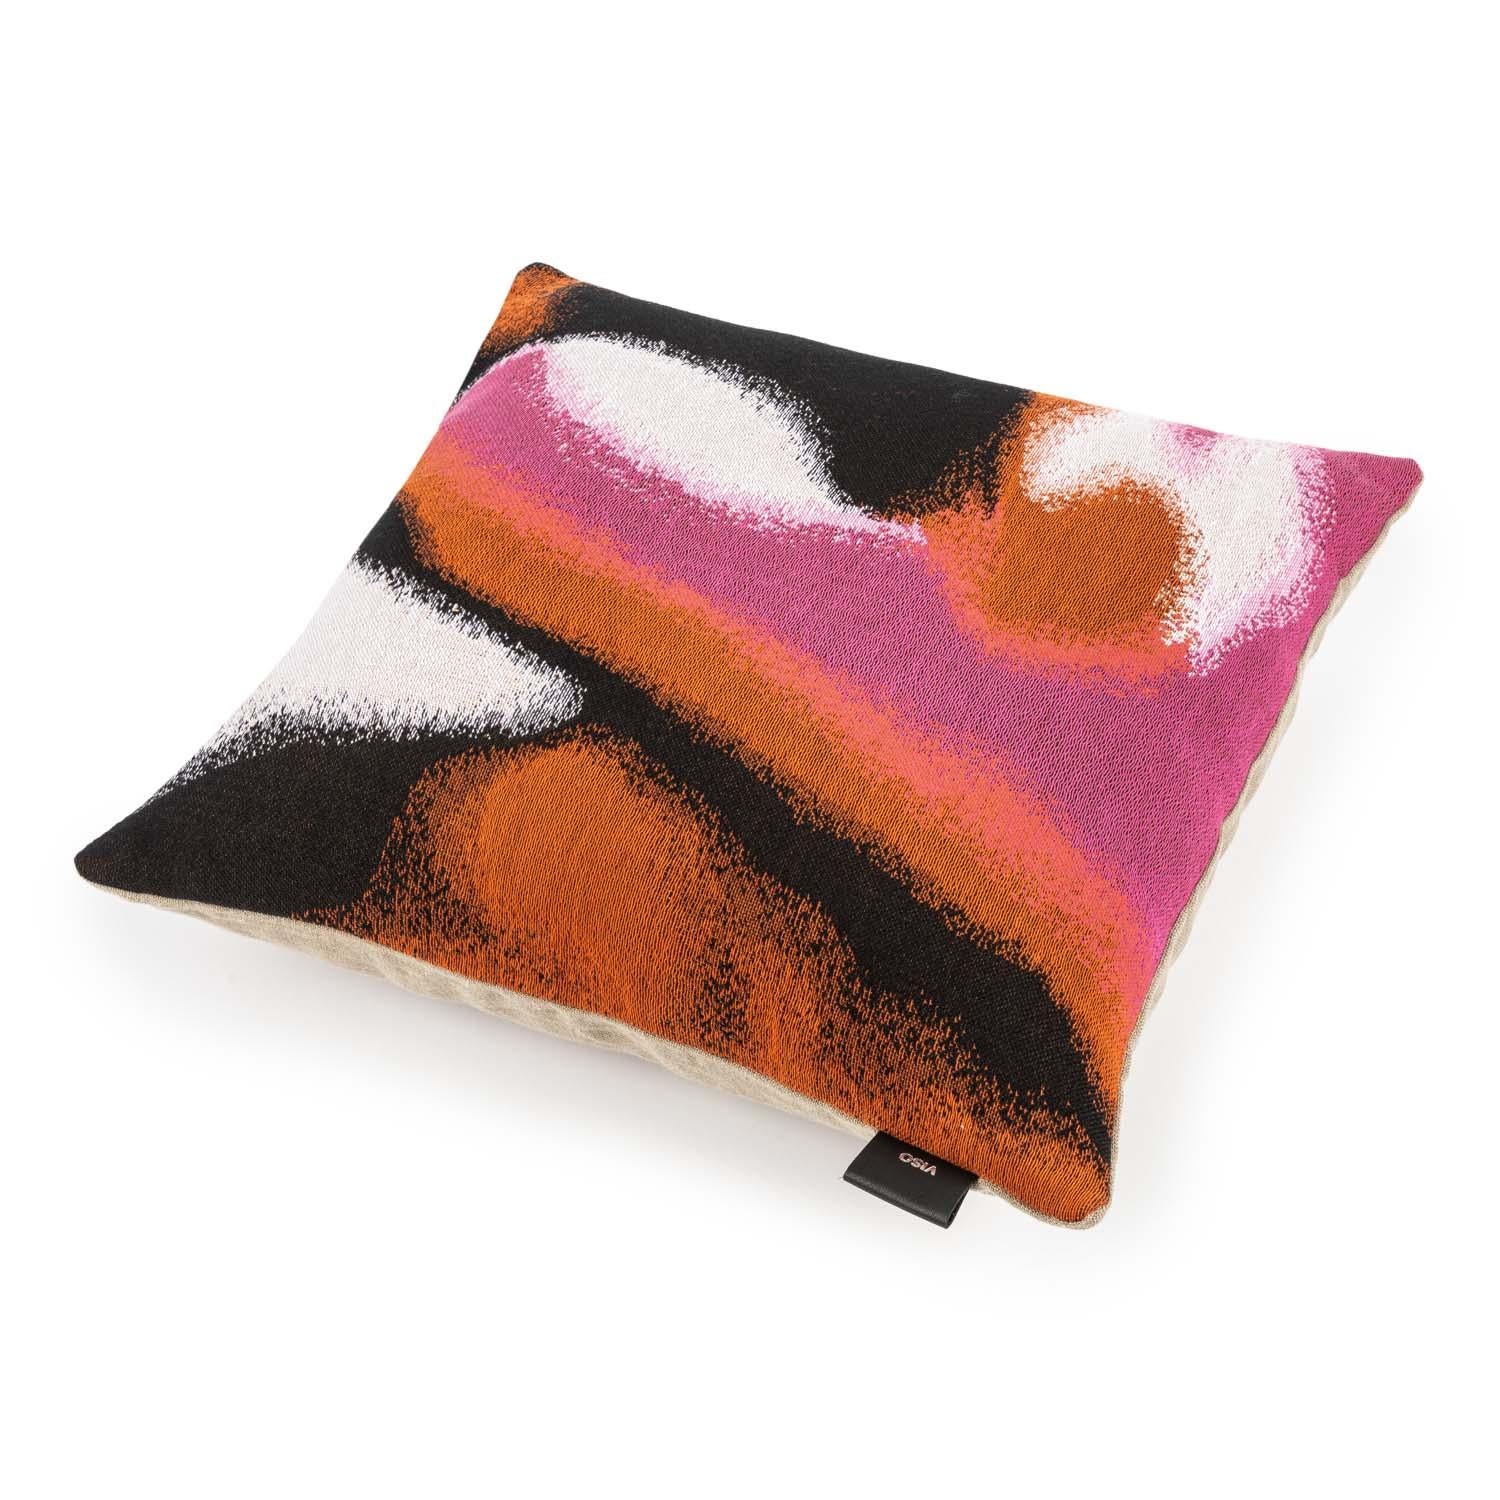 These tapestry series turns textile to art. A meticulously crafted three-layer Jacquard produced in France, these pillows are finished expertly by hand to create a subtle three-dimensional effect. In either a groovy pink and red color combination or